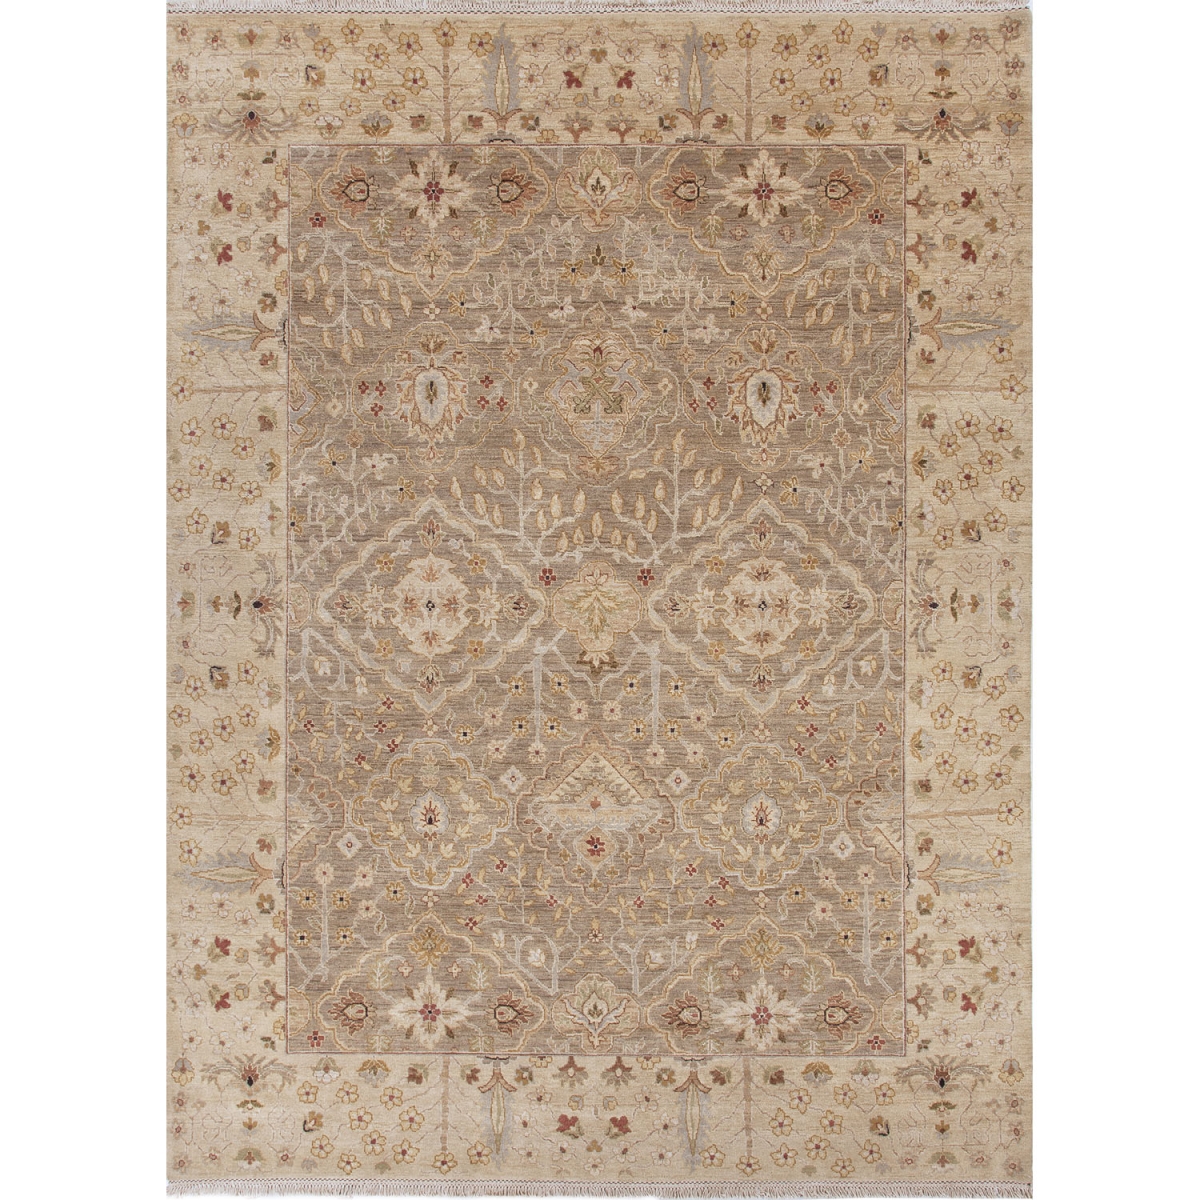 Rug103303 8 X 10 Ft. Opus Allegro Hand-knotted Floral Cream & Maroon Area Rug